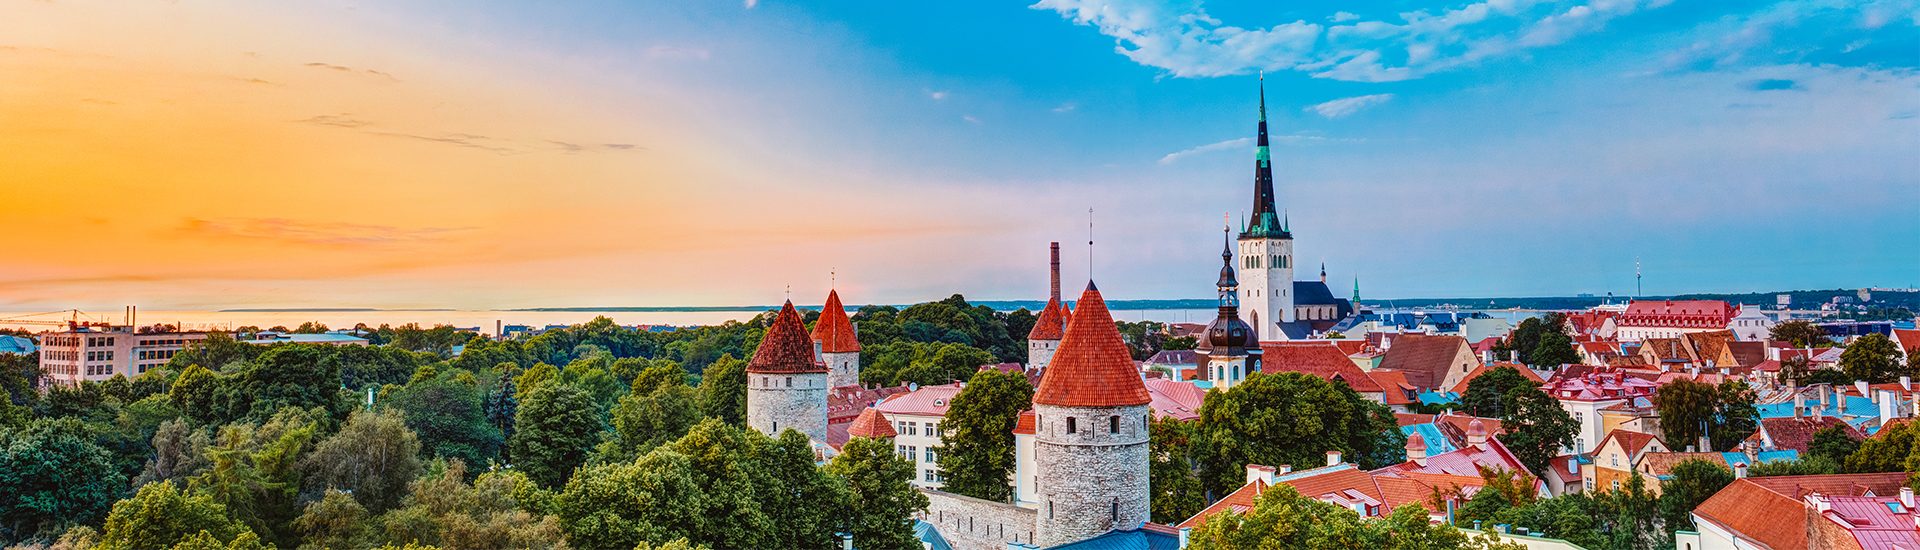 How to spend a day in Tallinn